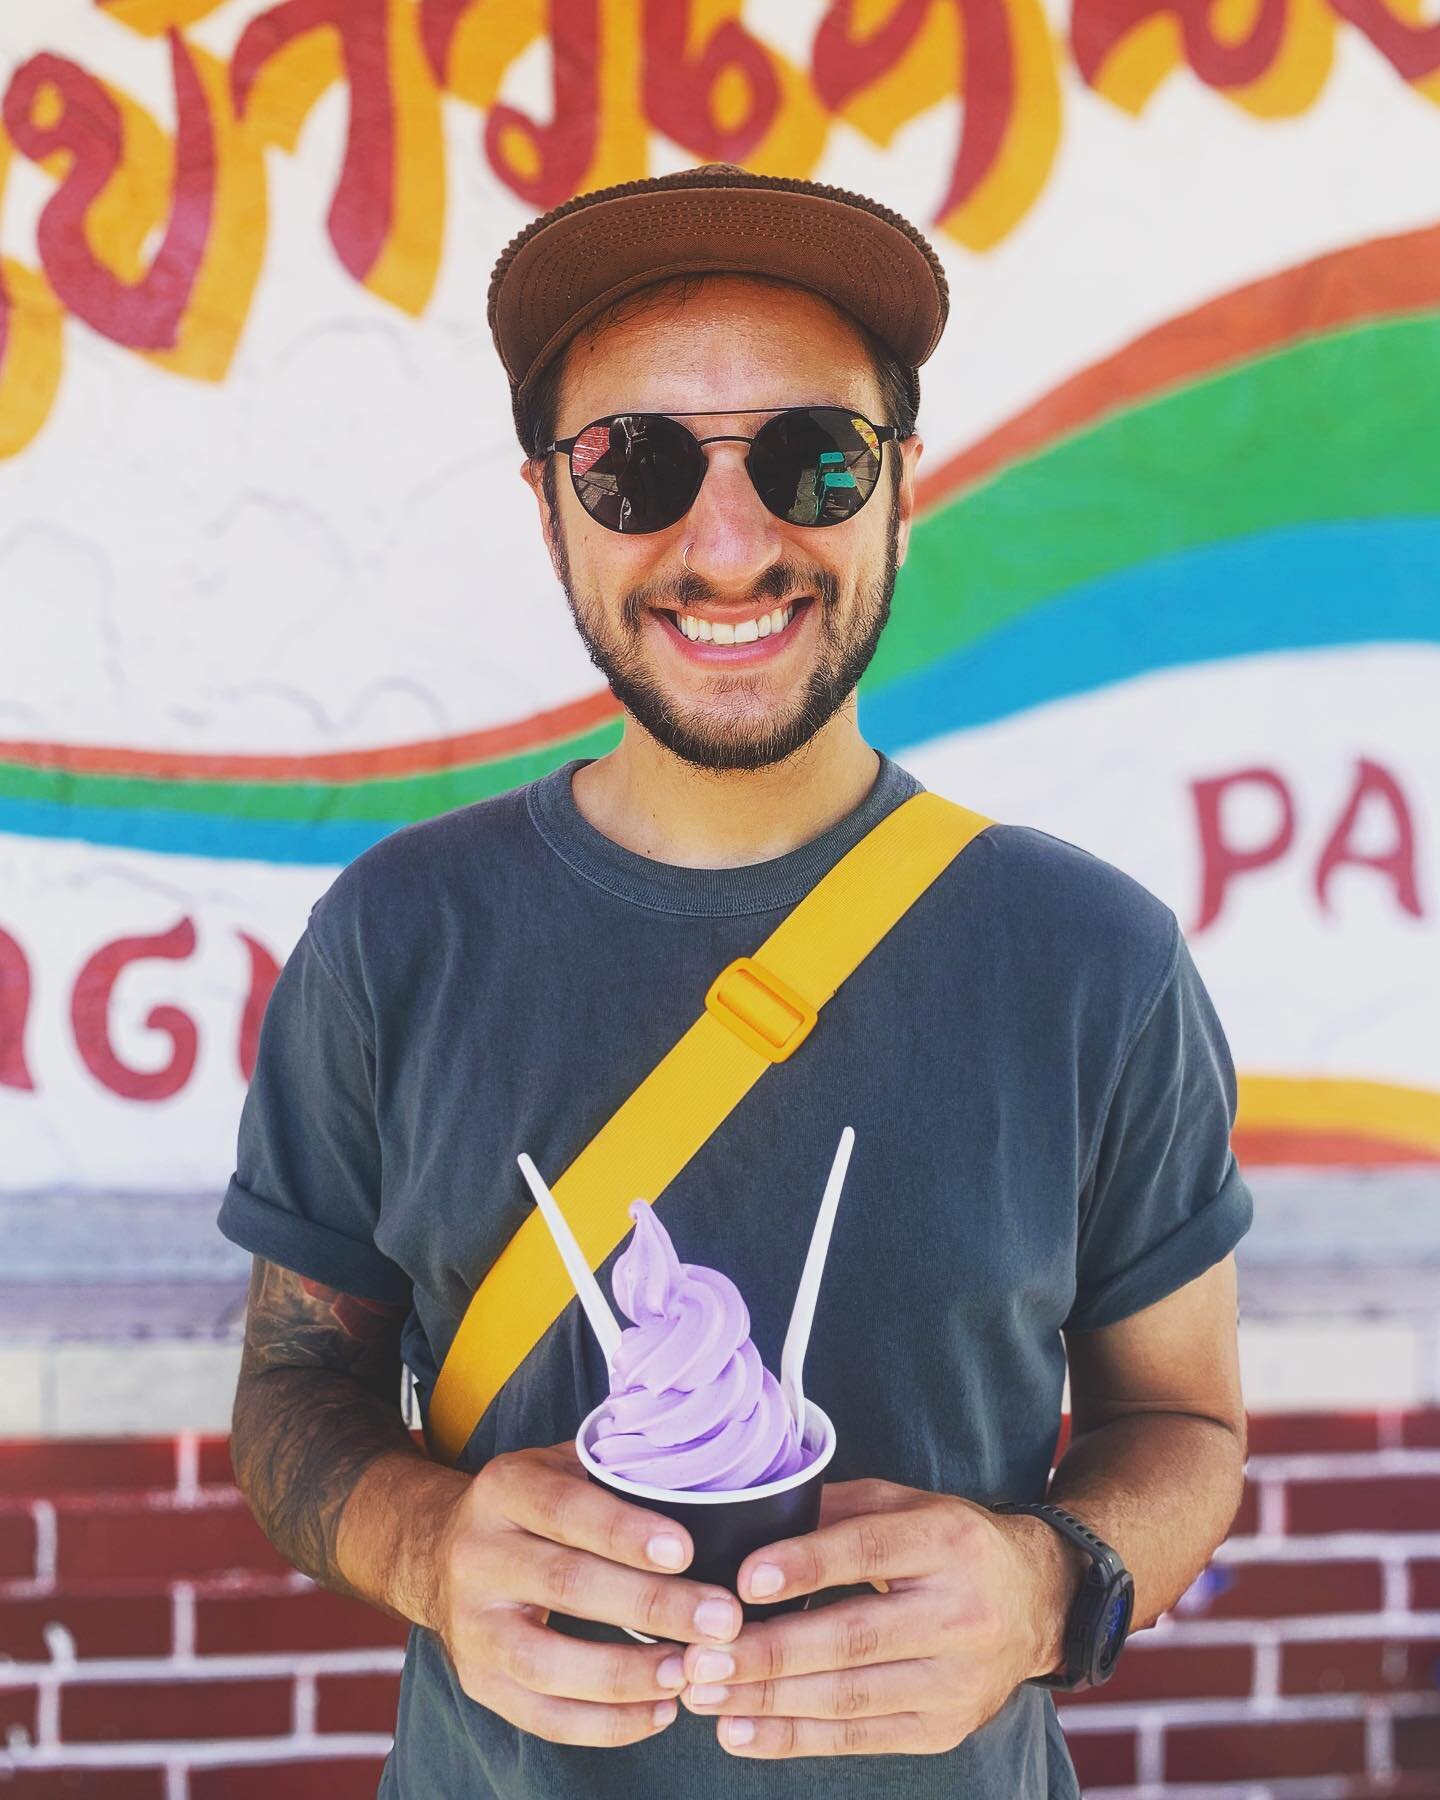 &ldquo;How many colors can you fit into one photo?&rdquo; 🎨 #LA #VeganSoftServe #UbeYourThirst
.
📷: @findingnimah